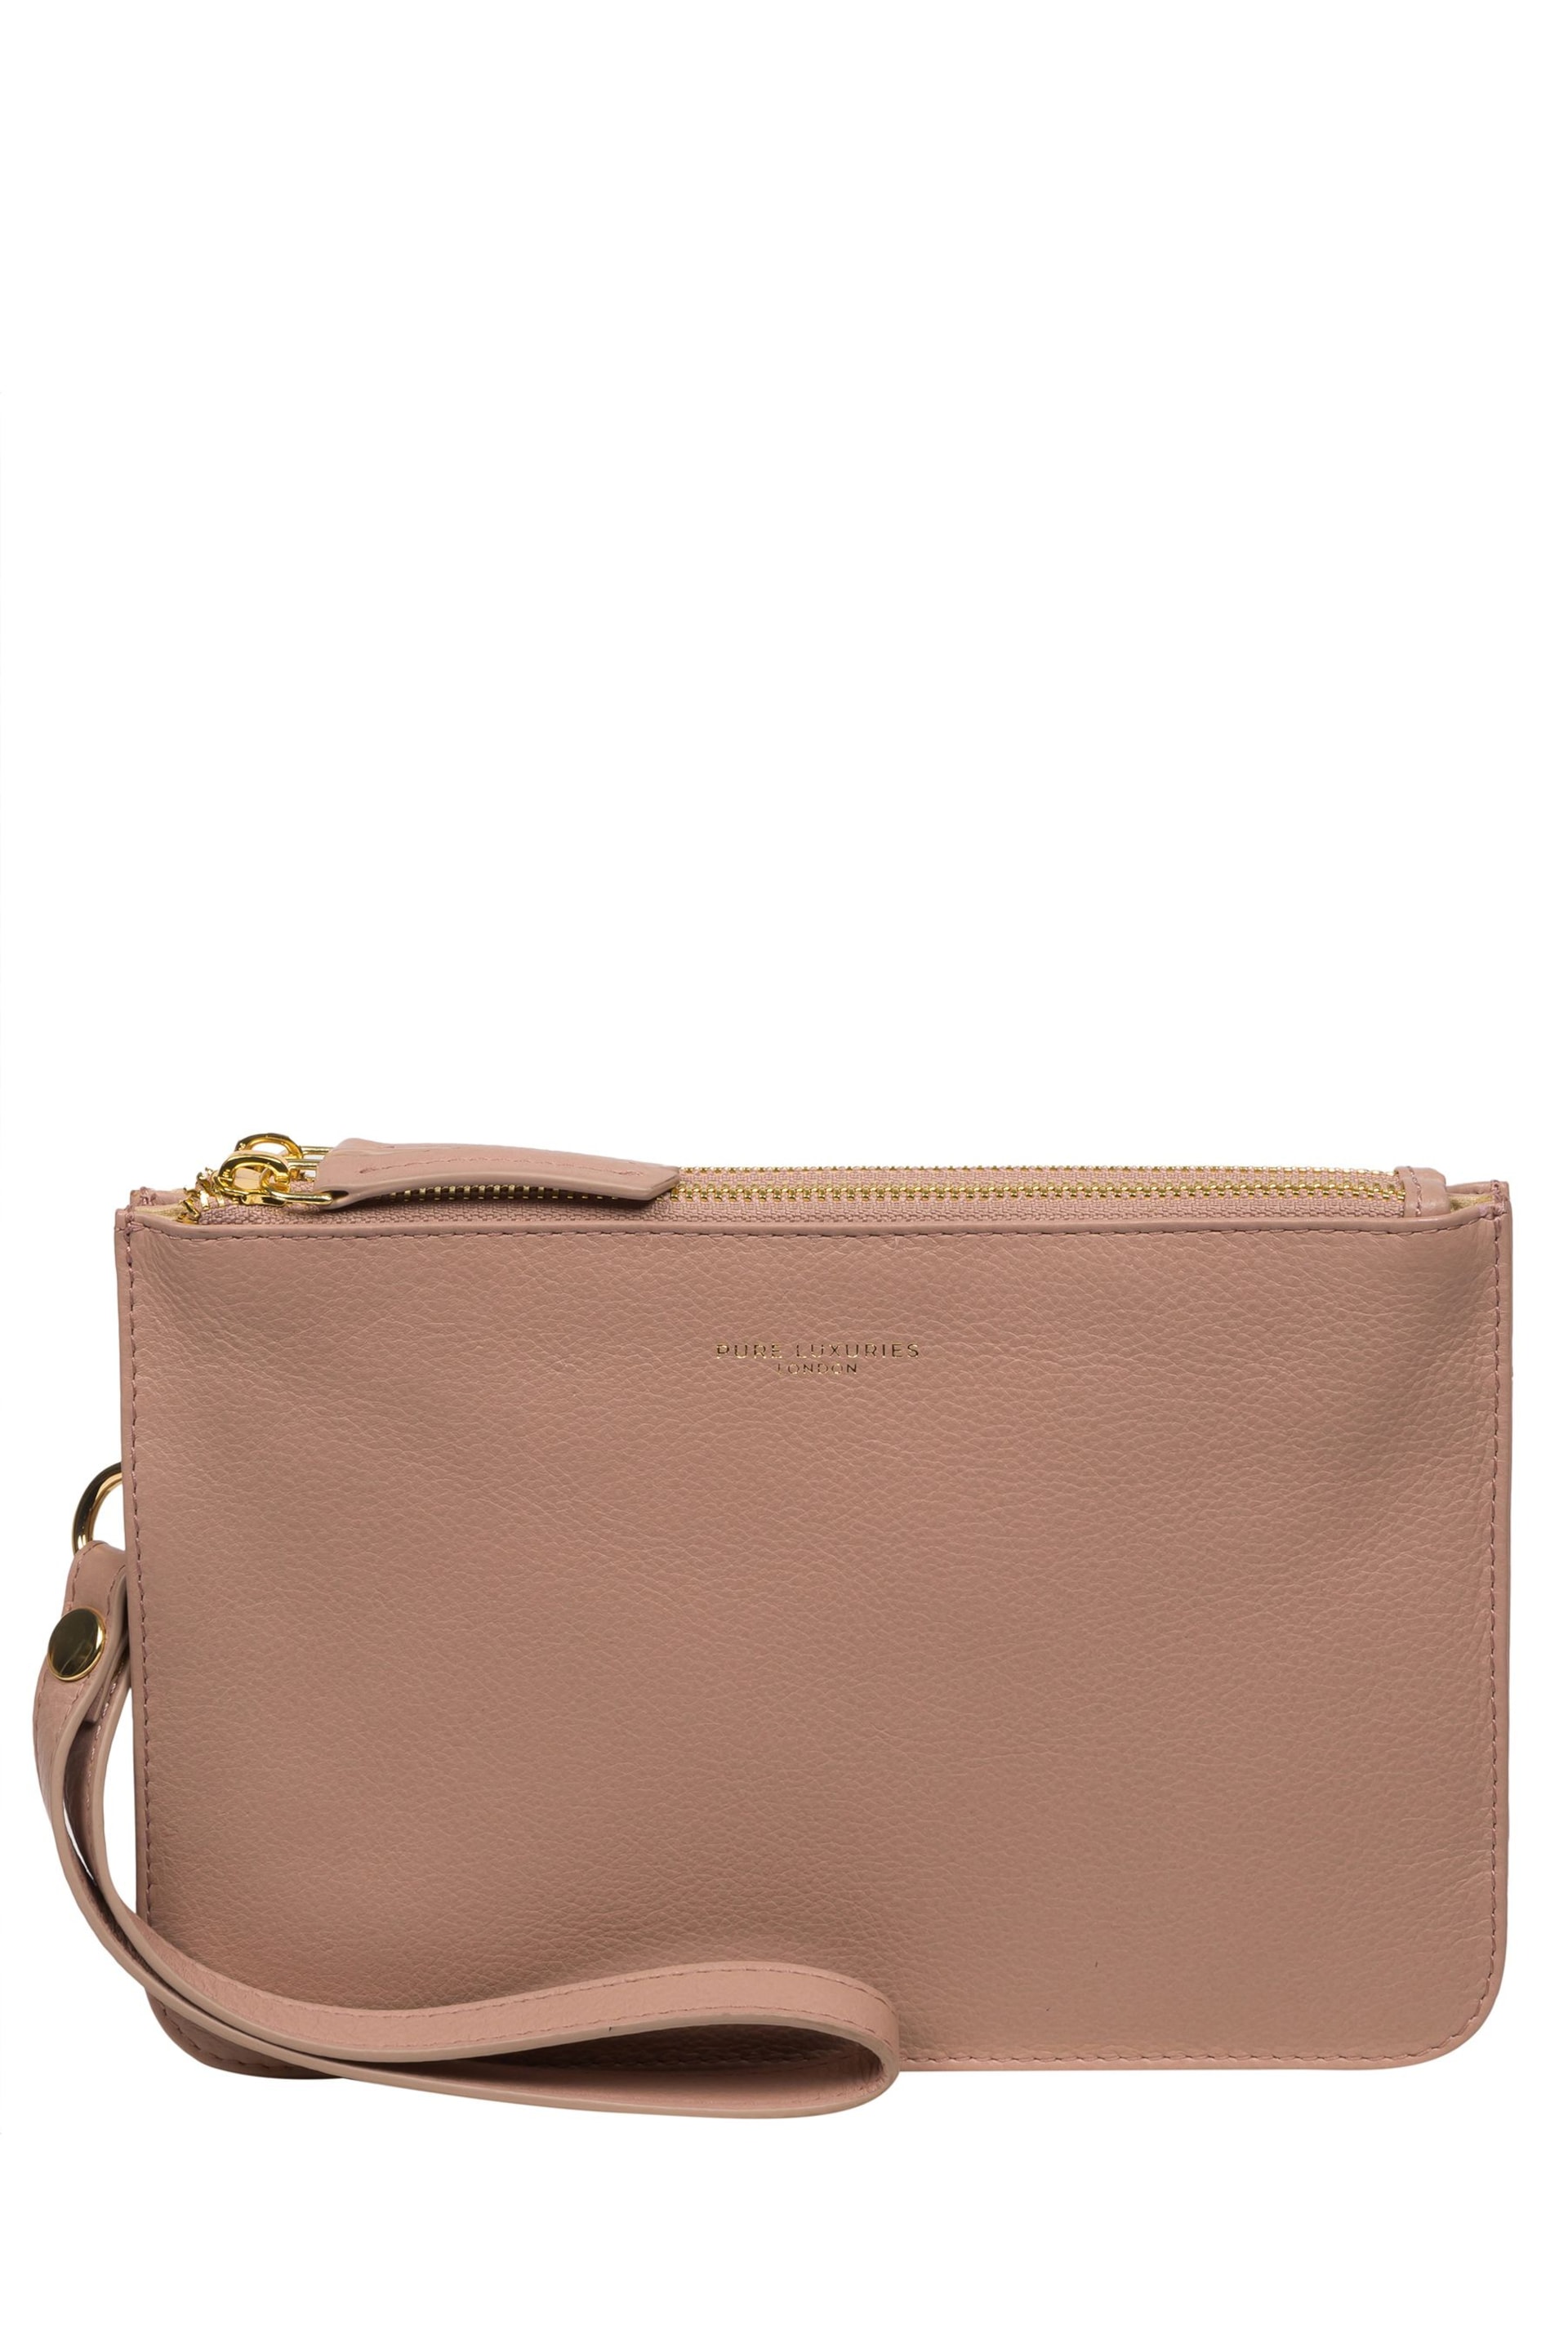 Pure Luxuries London Addison Nappa Leather Clutch Bag - Image 1 of 7